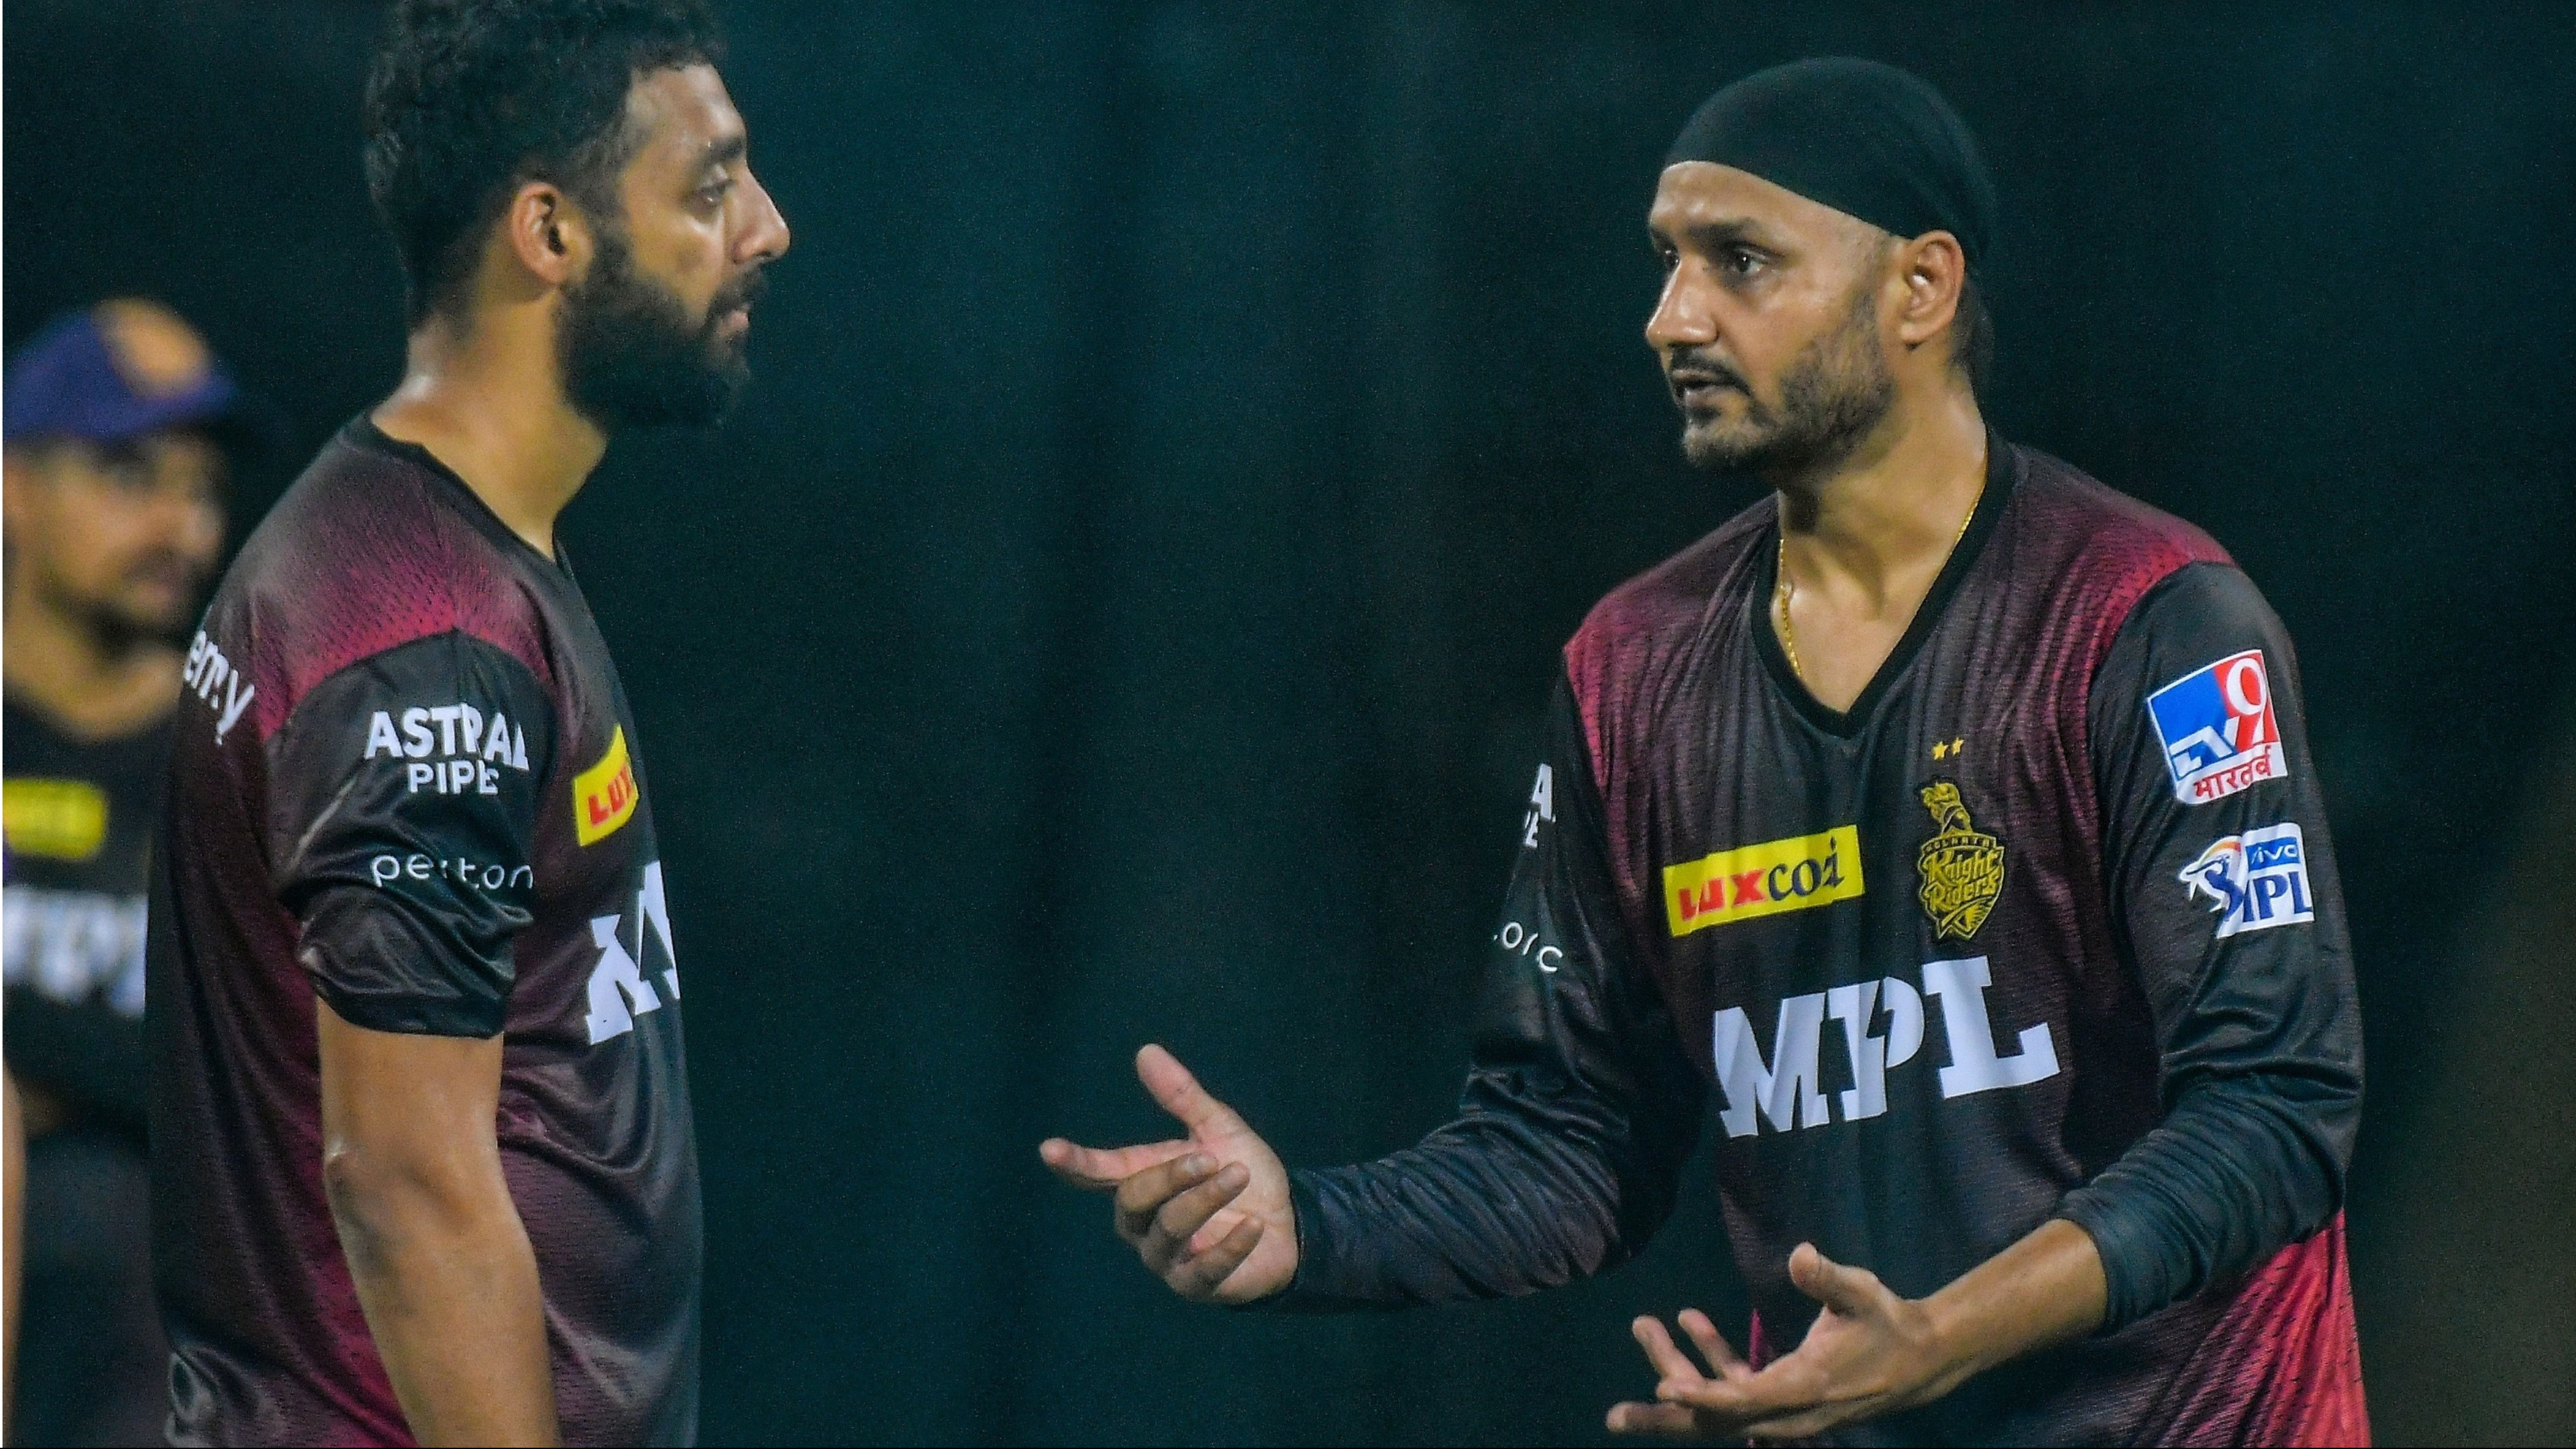 IPL 2021: Harbhajan Singh says no idea on future with KKR, but would love to be a coach or mentor 